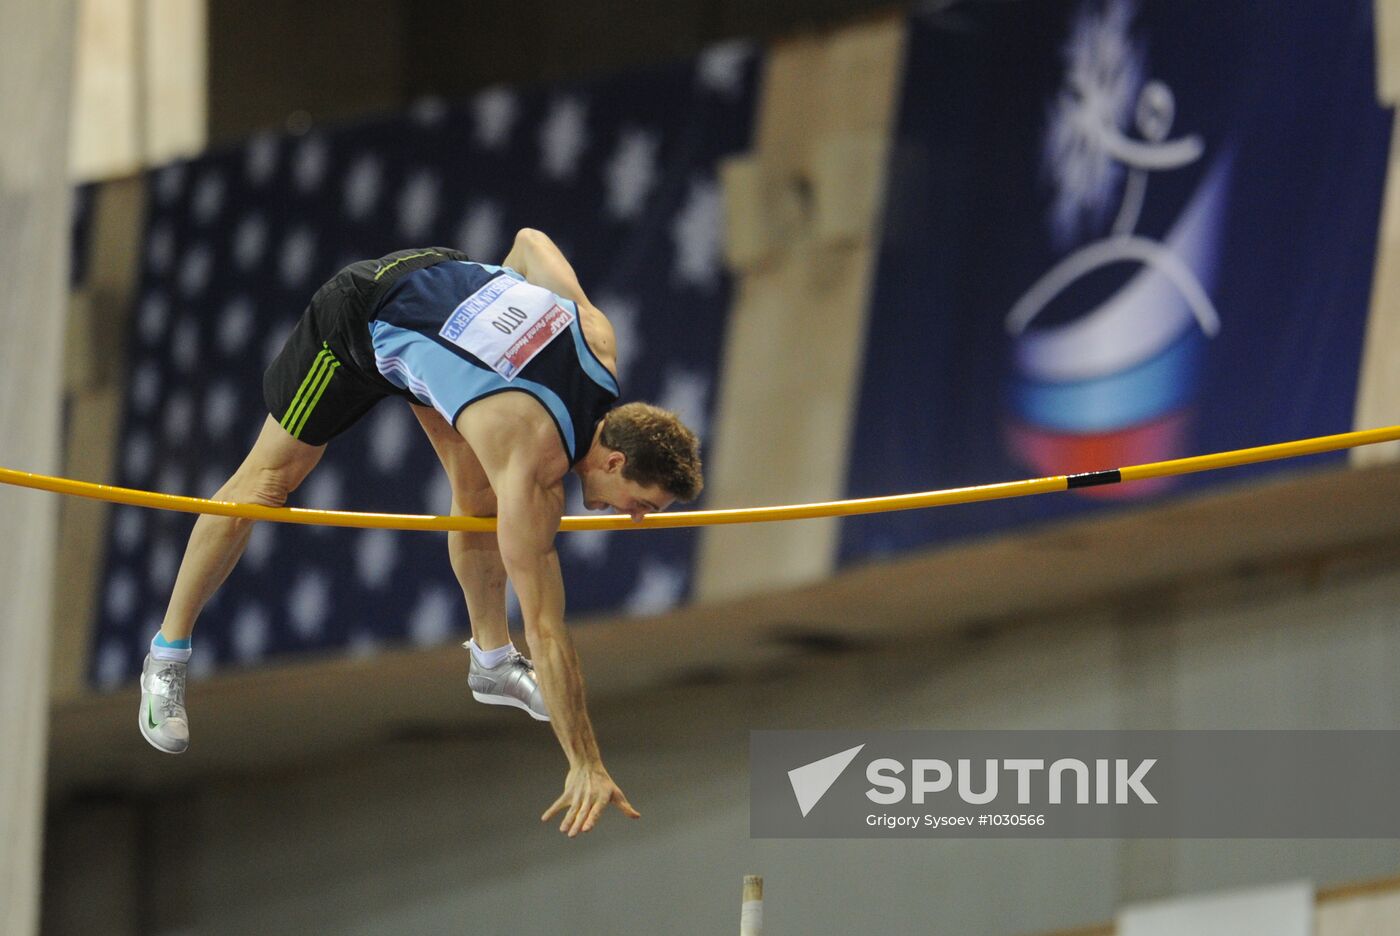 Track and field. "Russian Winter 2012"